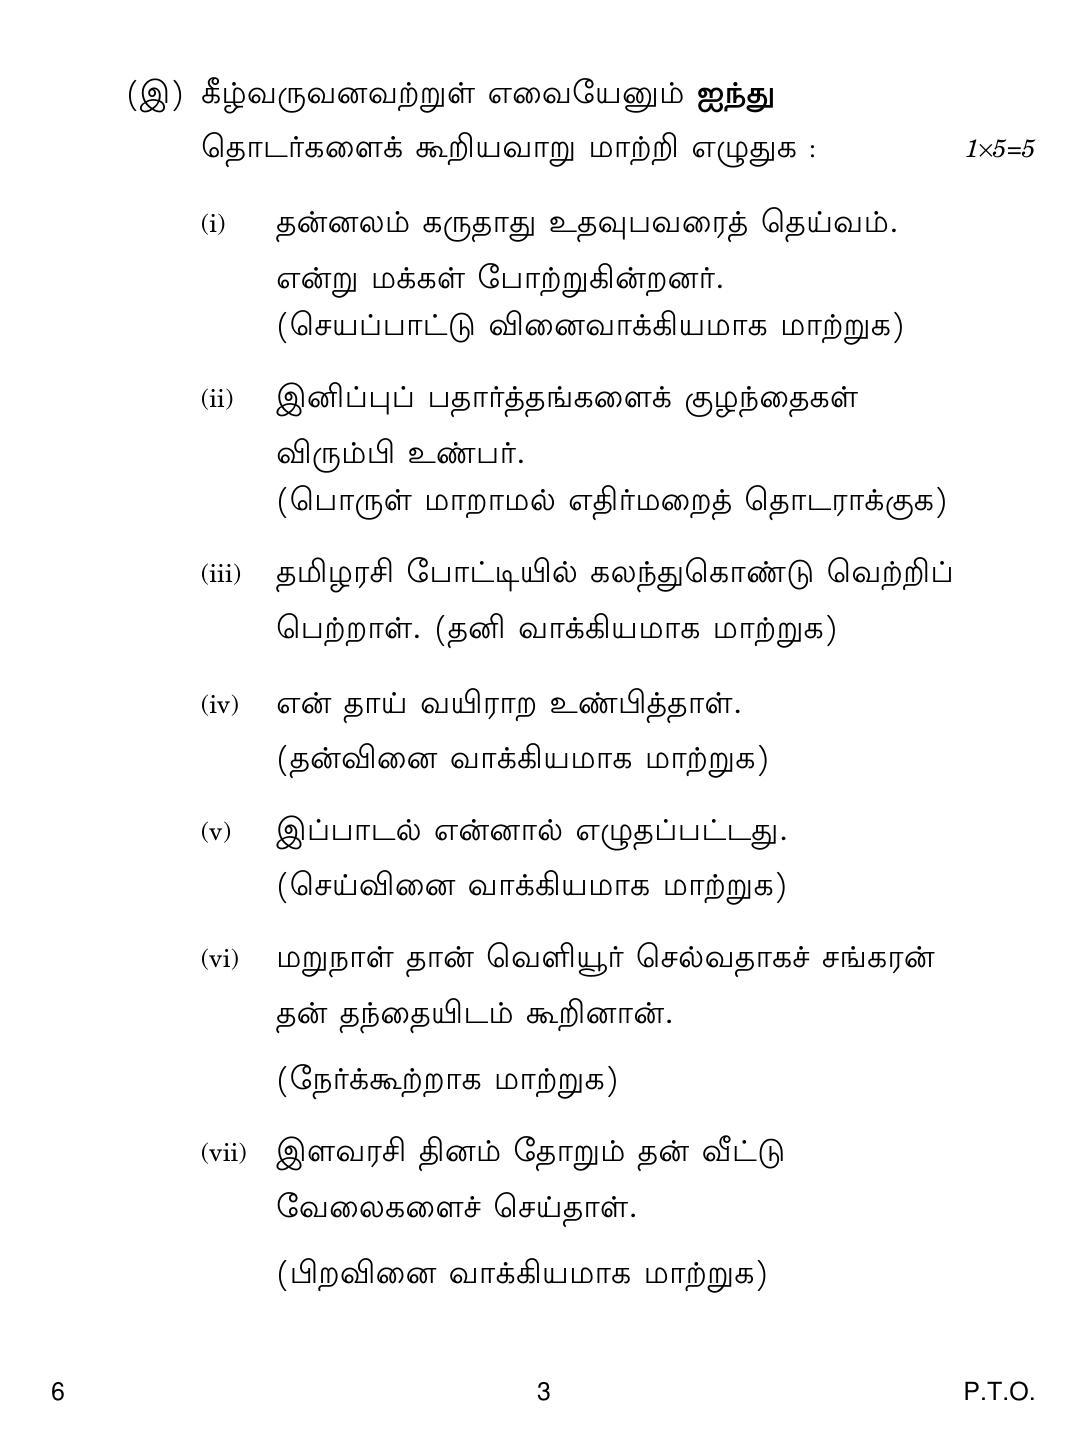 CBSE Class 12 6 Tamil 2018 Question Paper - Page 3